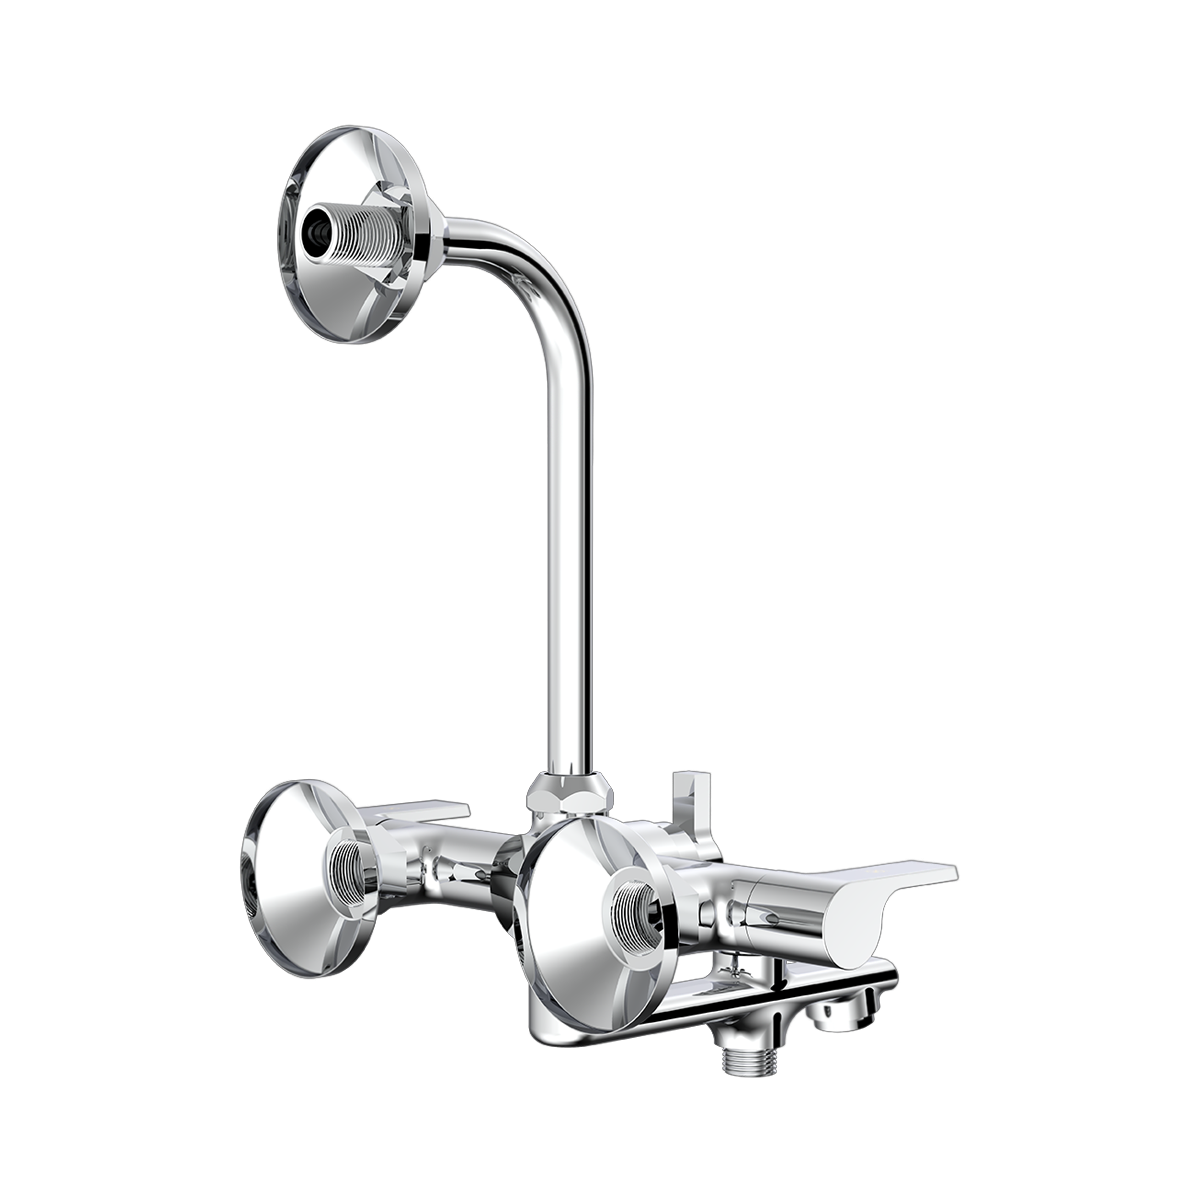 3 In 1 Wall Mixer With Provision For Both Overhead